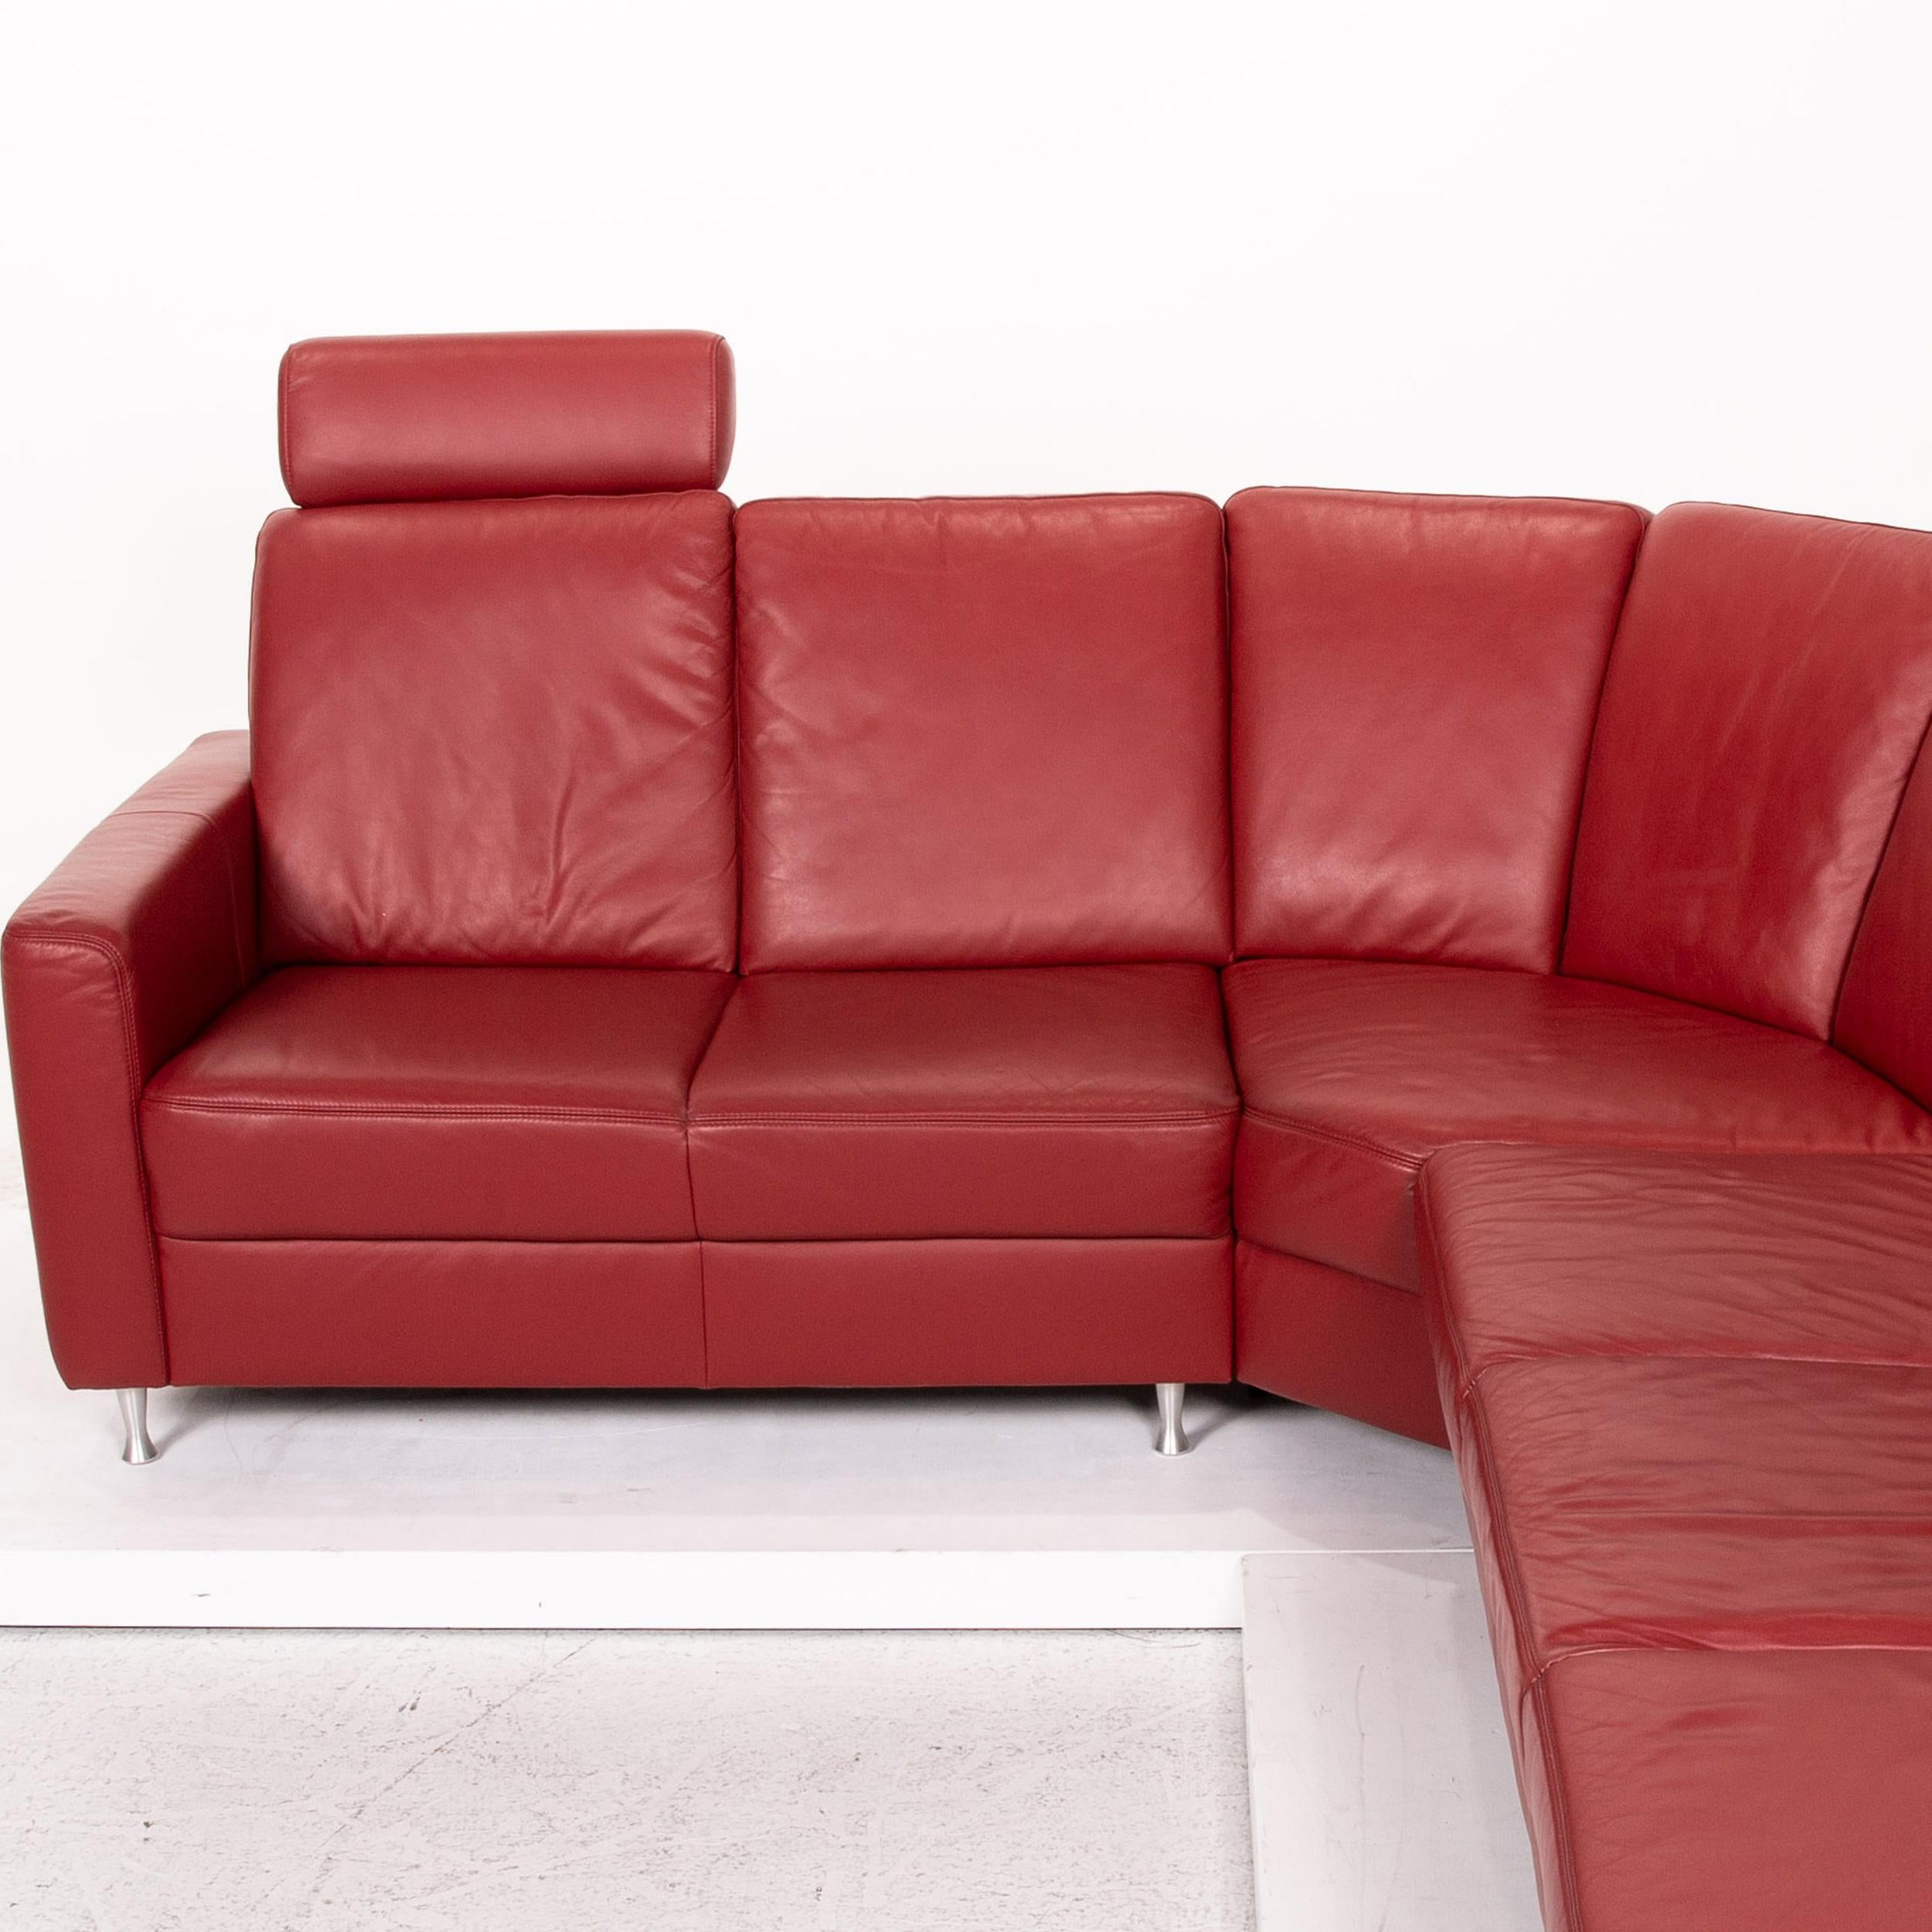 Sample Ring Leather Corner Sofa Red Dark Red Sofa Function Couch For Sale 1